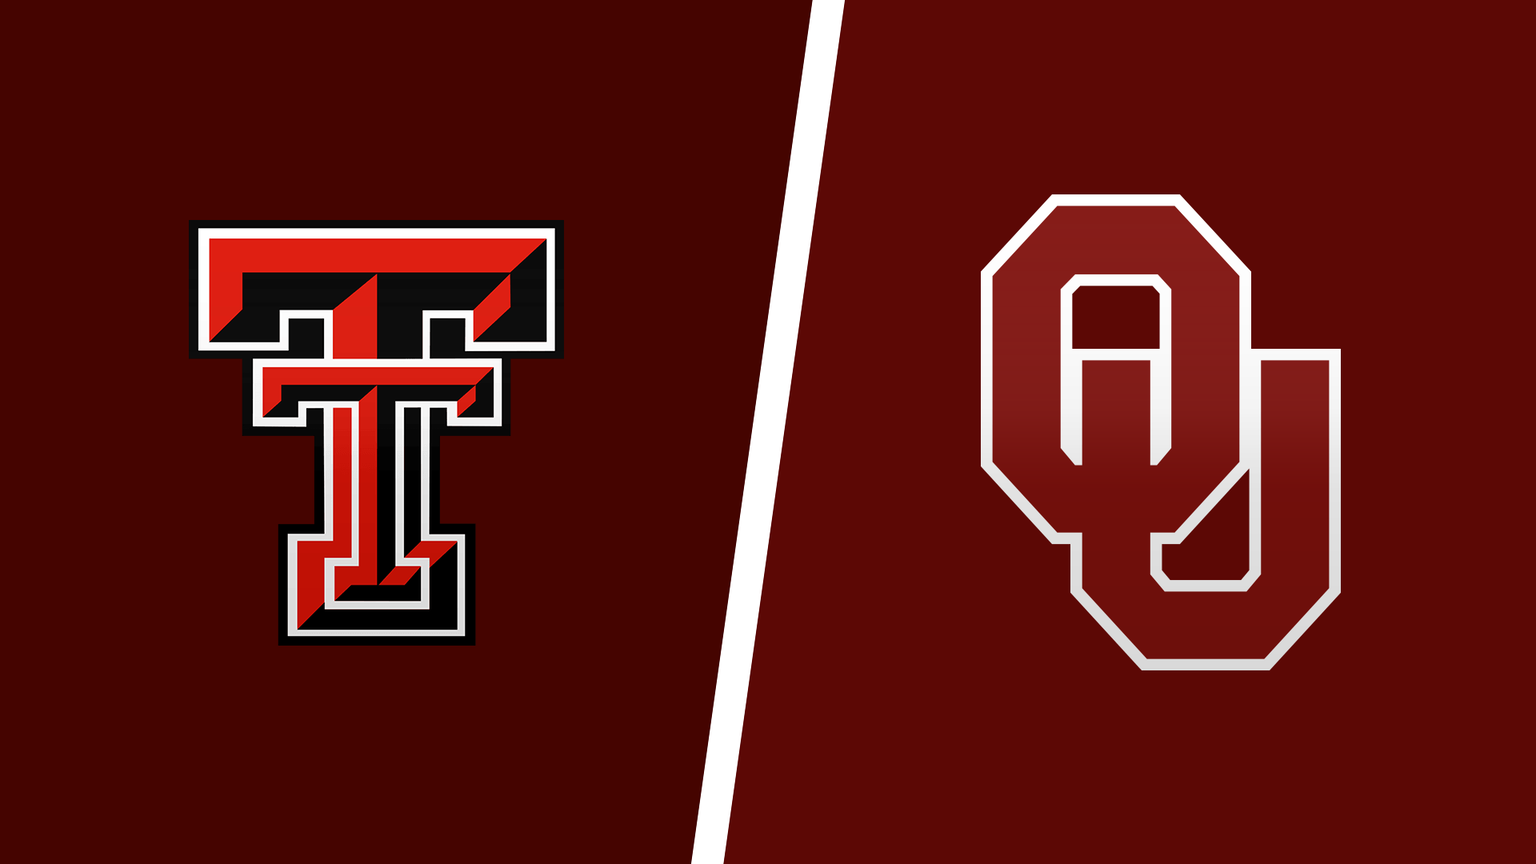 How to Watch Oklahoma vs. Texas Tech Game Live Online on March 11, 2022